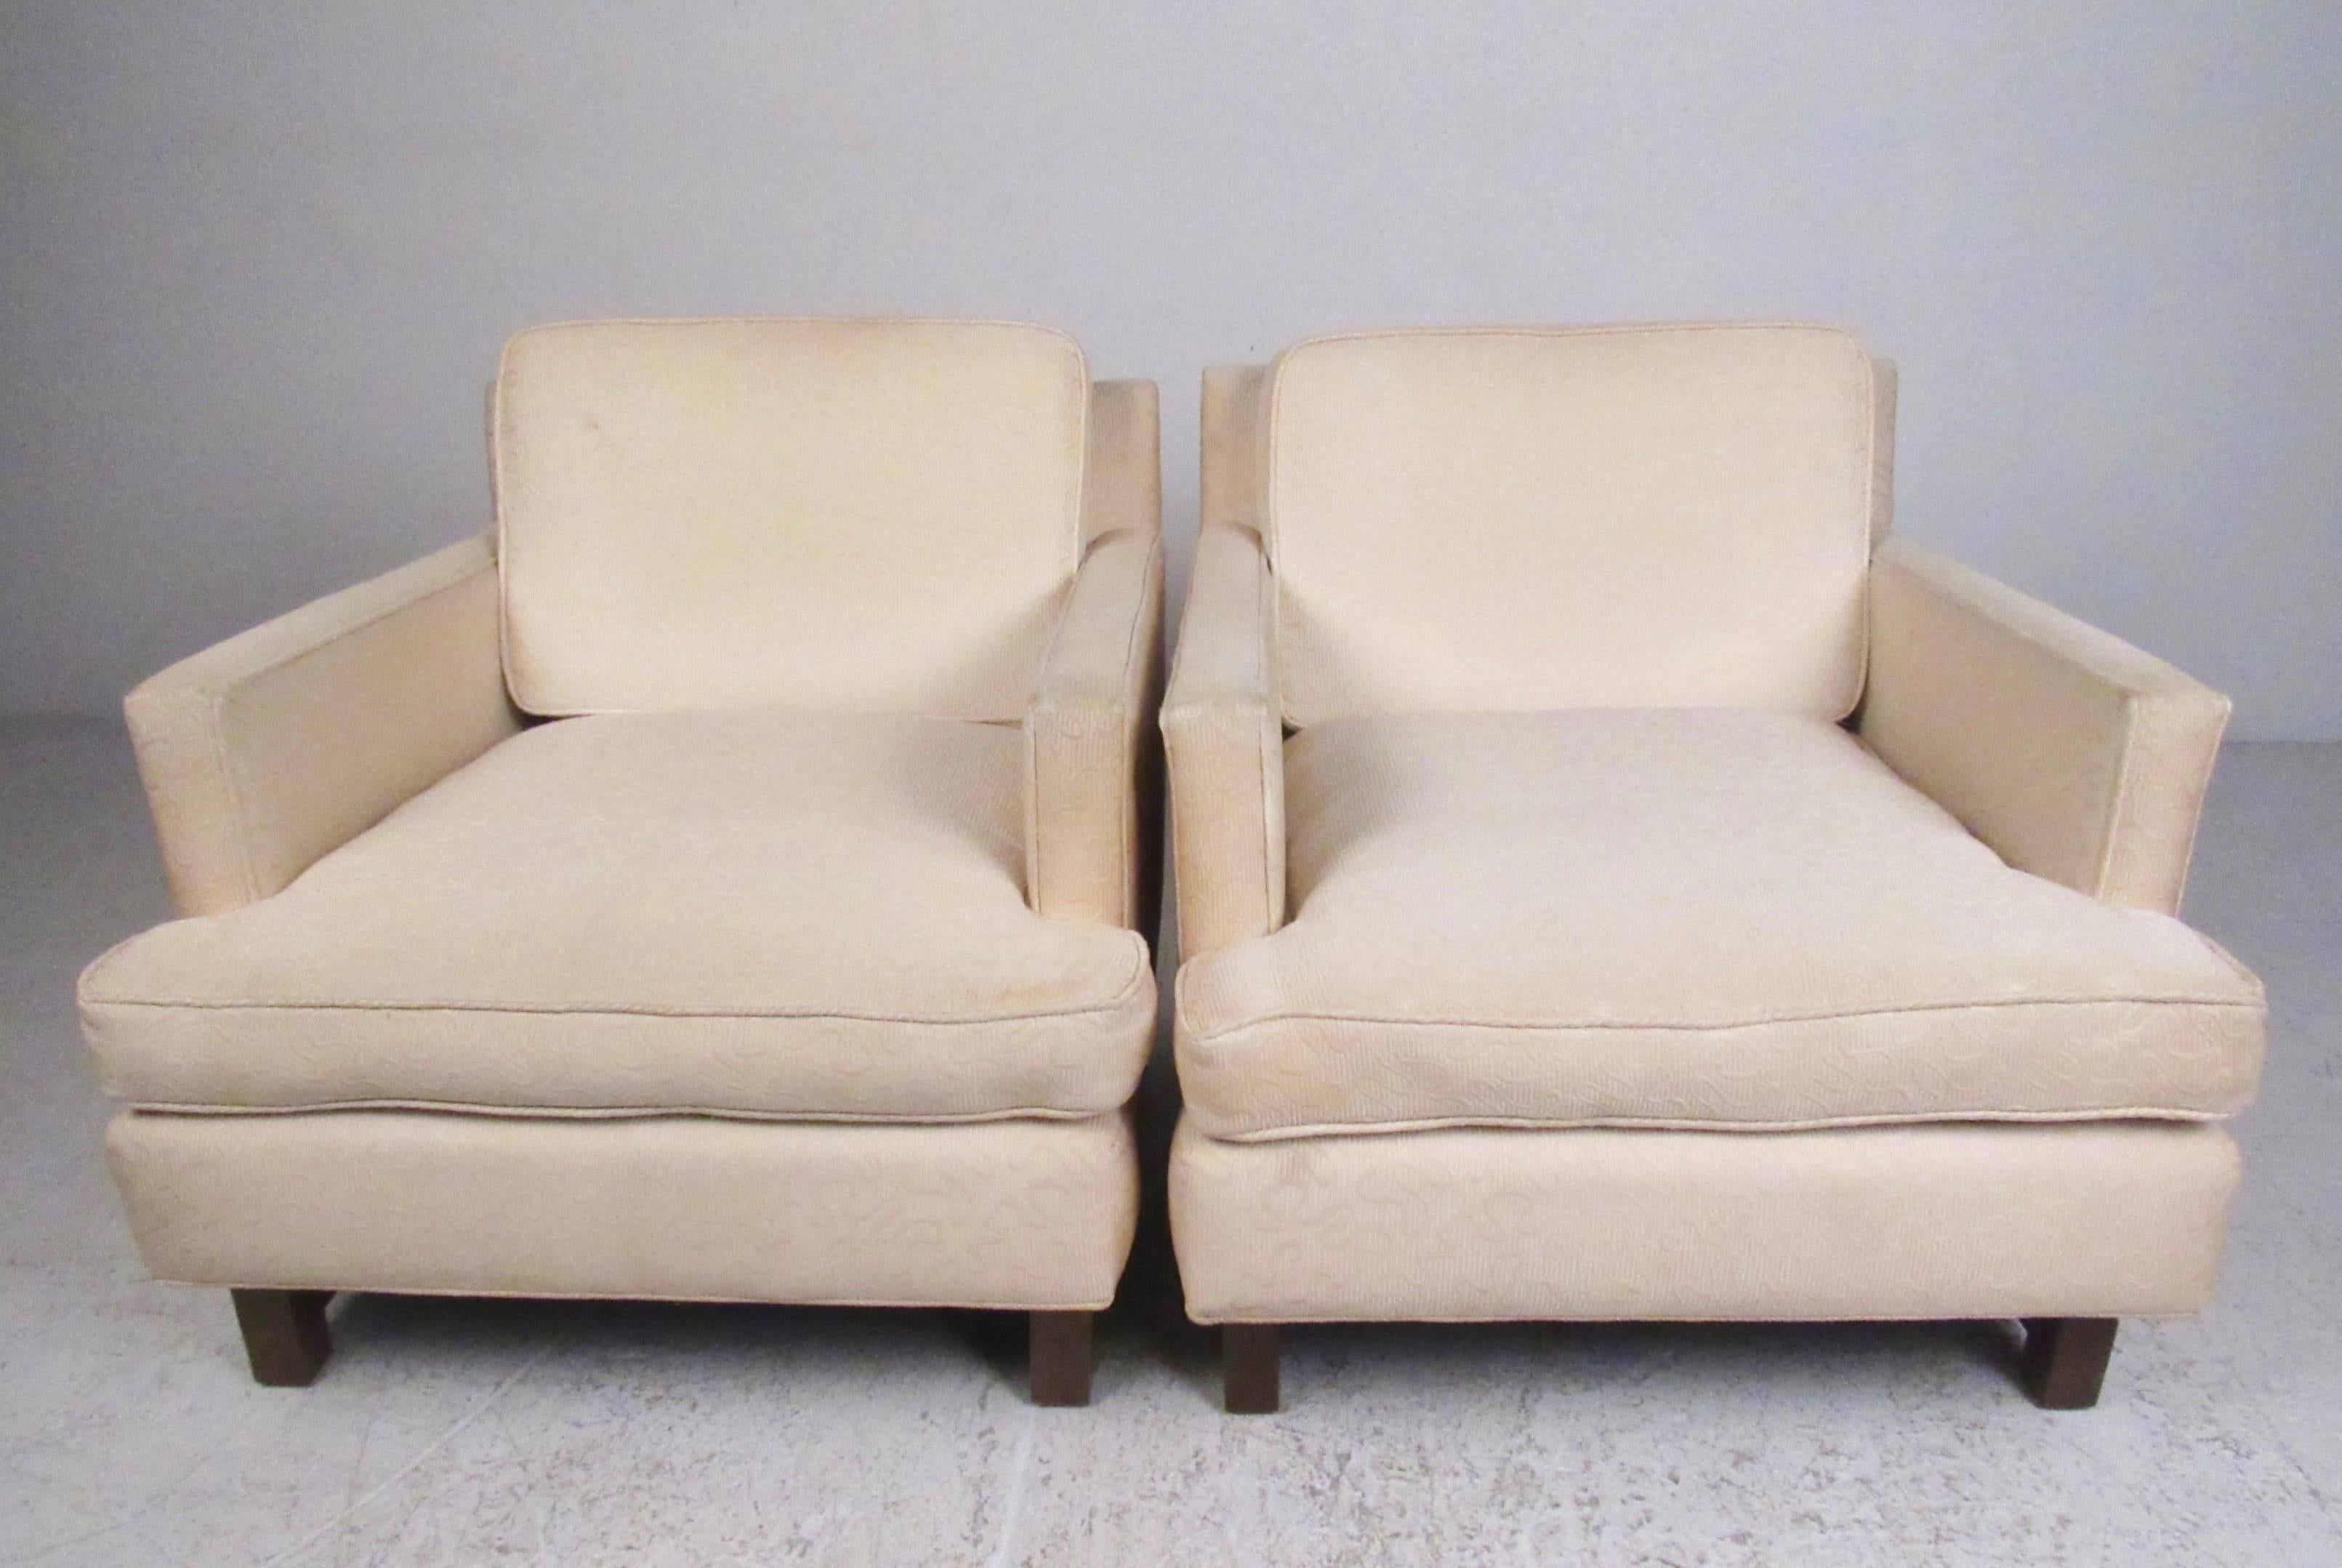 This stylish pair of vintage modern club chairs feature design similar to that by Edward Wormley for Dunbar. Hardwood legs with stretchers add to the mid-century style of this upholstered pair of oversized lounge chairs, perfect seating for home or